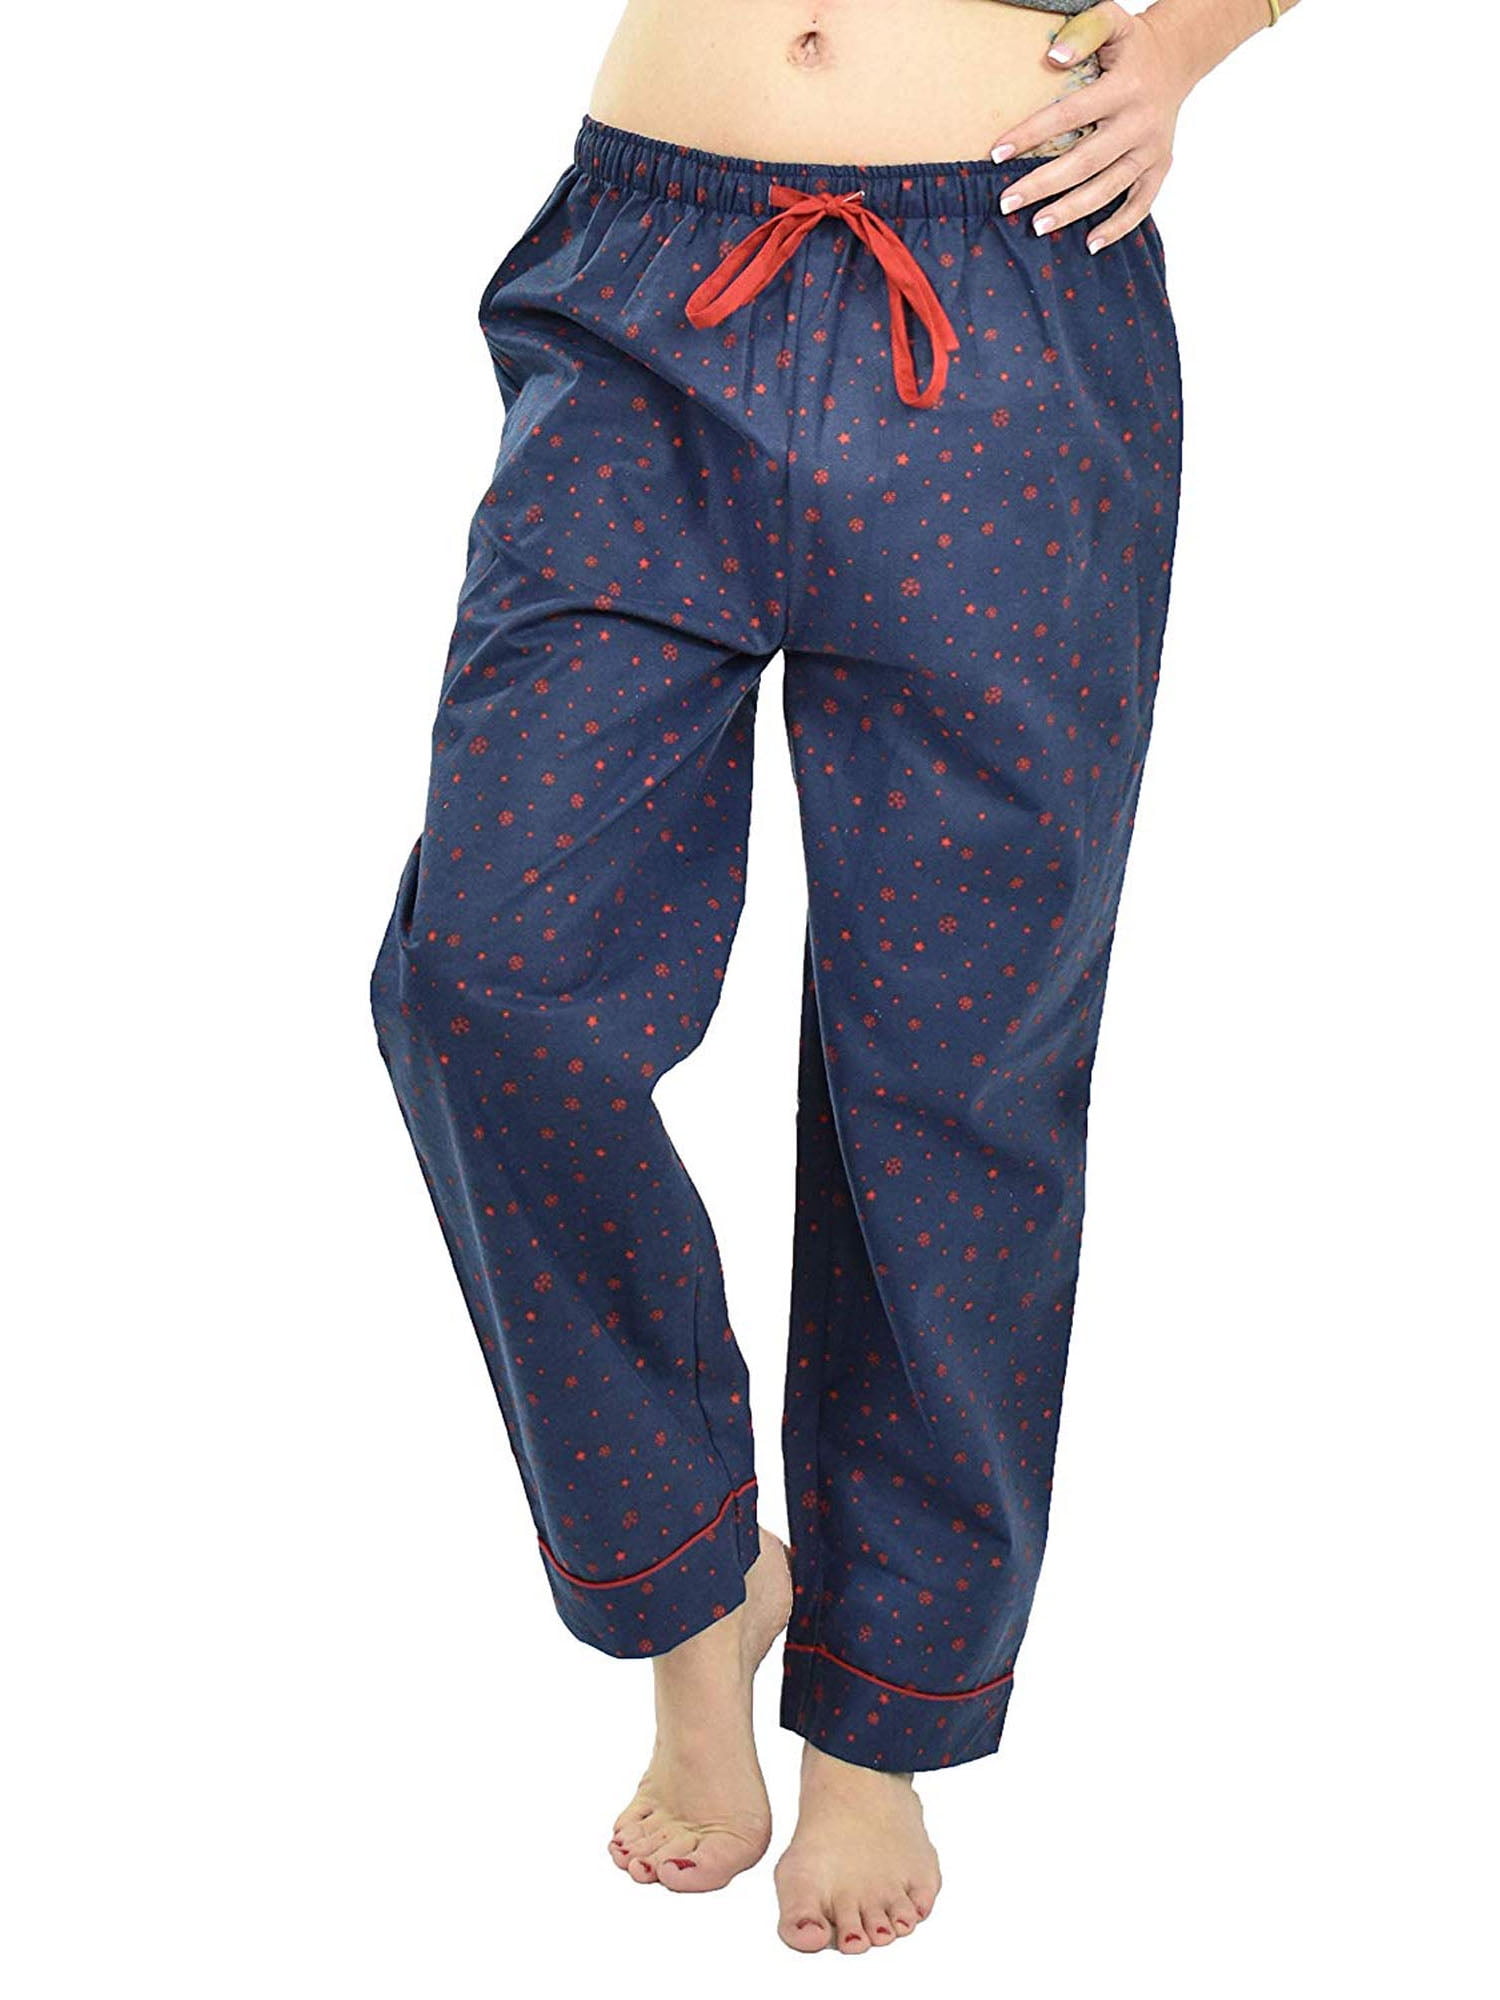 Up2date Fashion - Up2date Fashion's Women's 100% Cotton Flannel Pajama ...